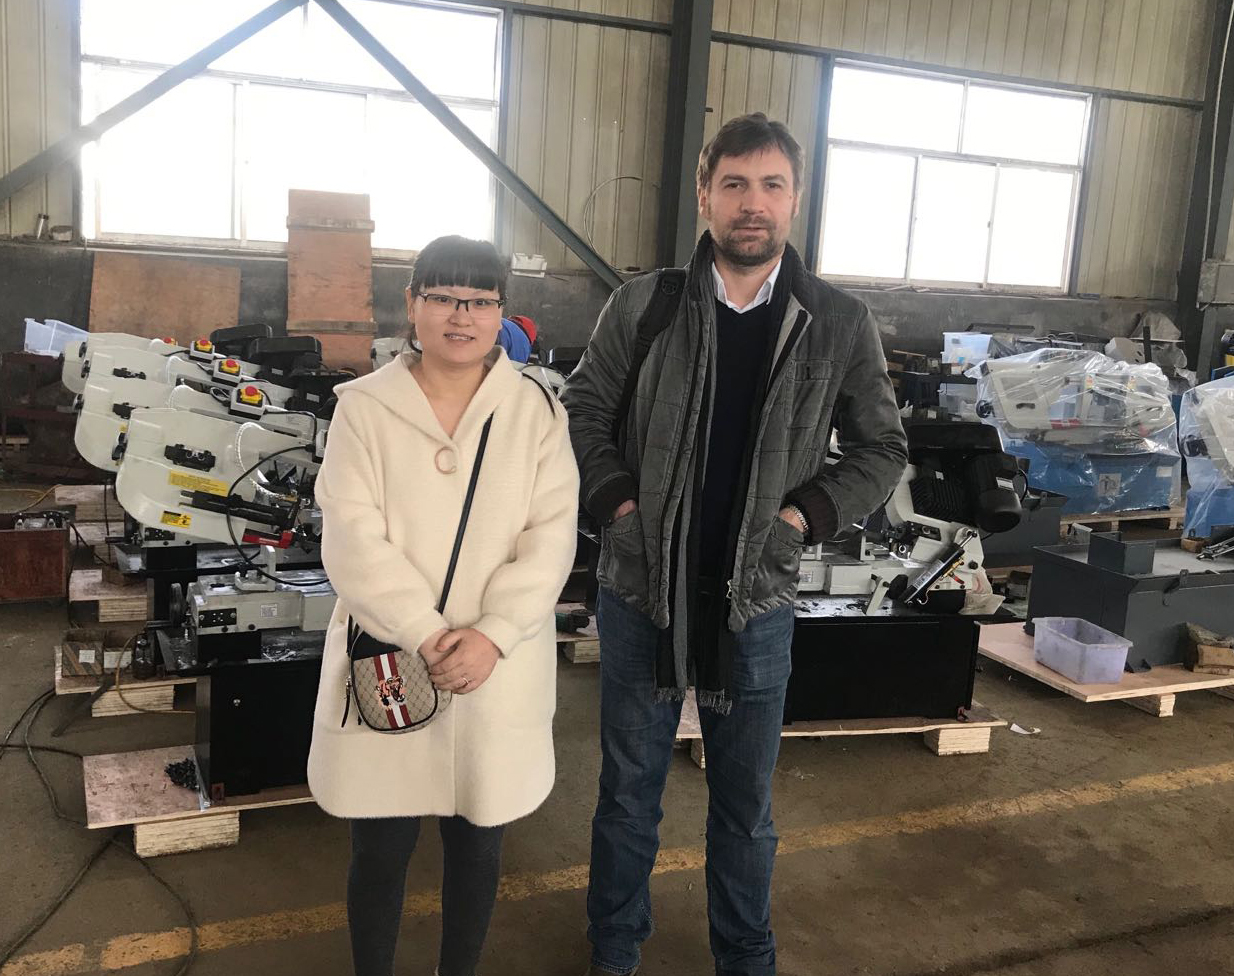 Belarus customer visit our factory and sign sawing machines